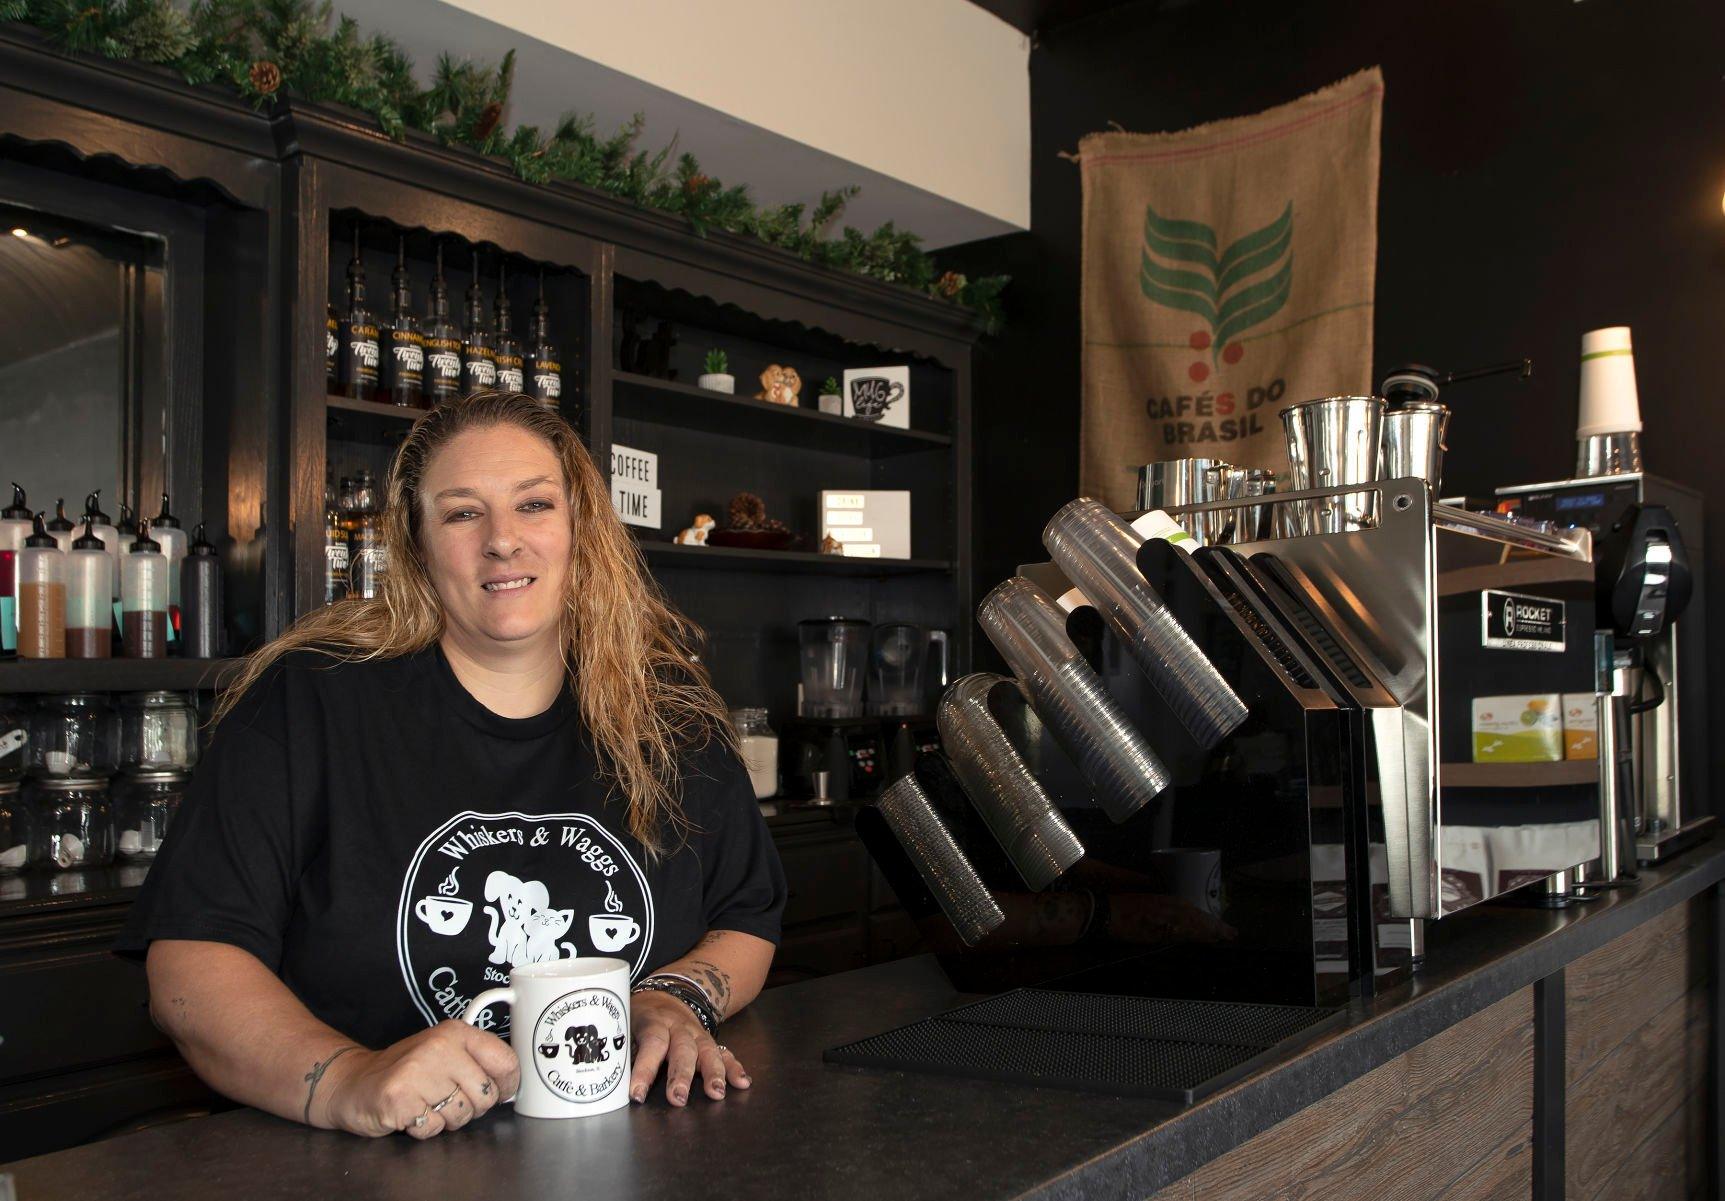 Owner Tina Boop behind the counter at Whiskers and Wags Catfe and Bakery in Stockton, Ill., on Saturday, July 9, 2022.    PHOTO CREDIT: Stephen Gassman